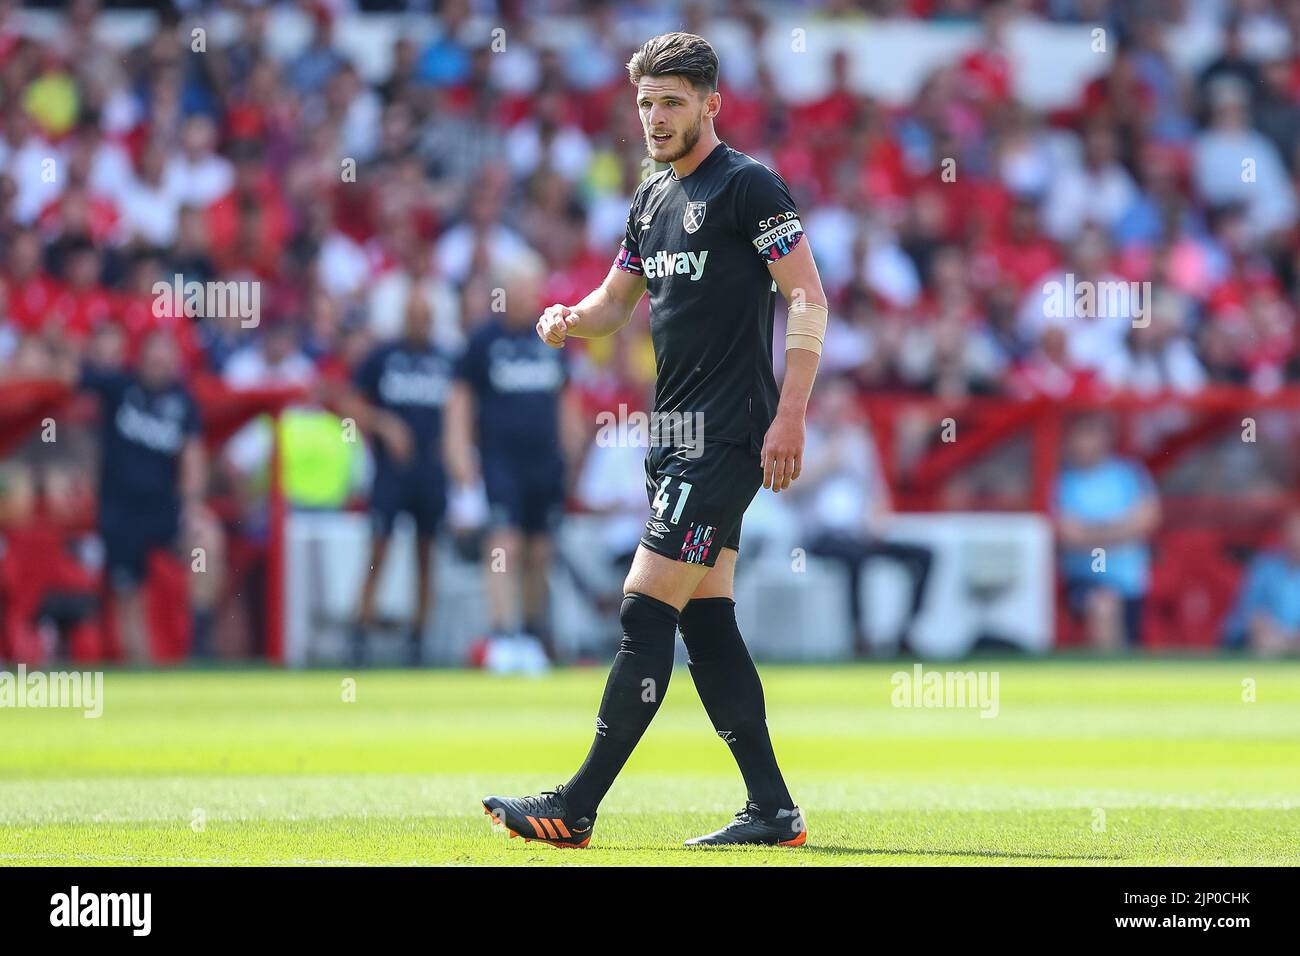 Declan Rice #41 of West Ham United during the game Stock Photo